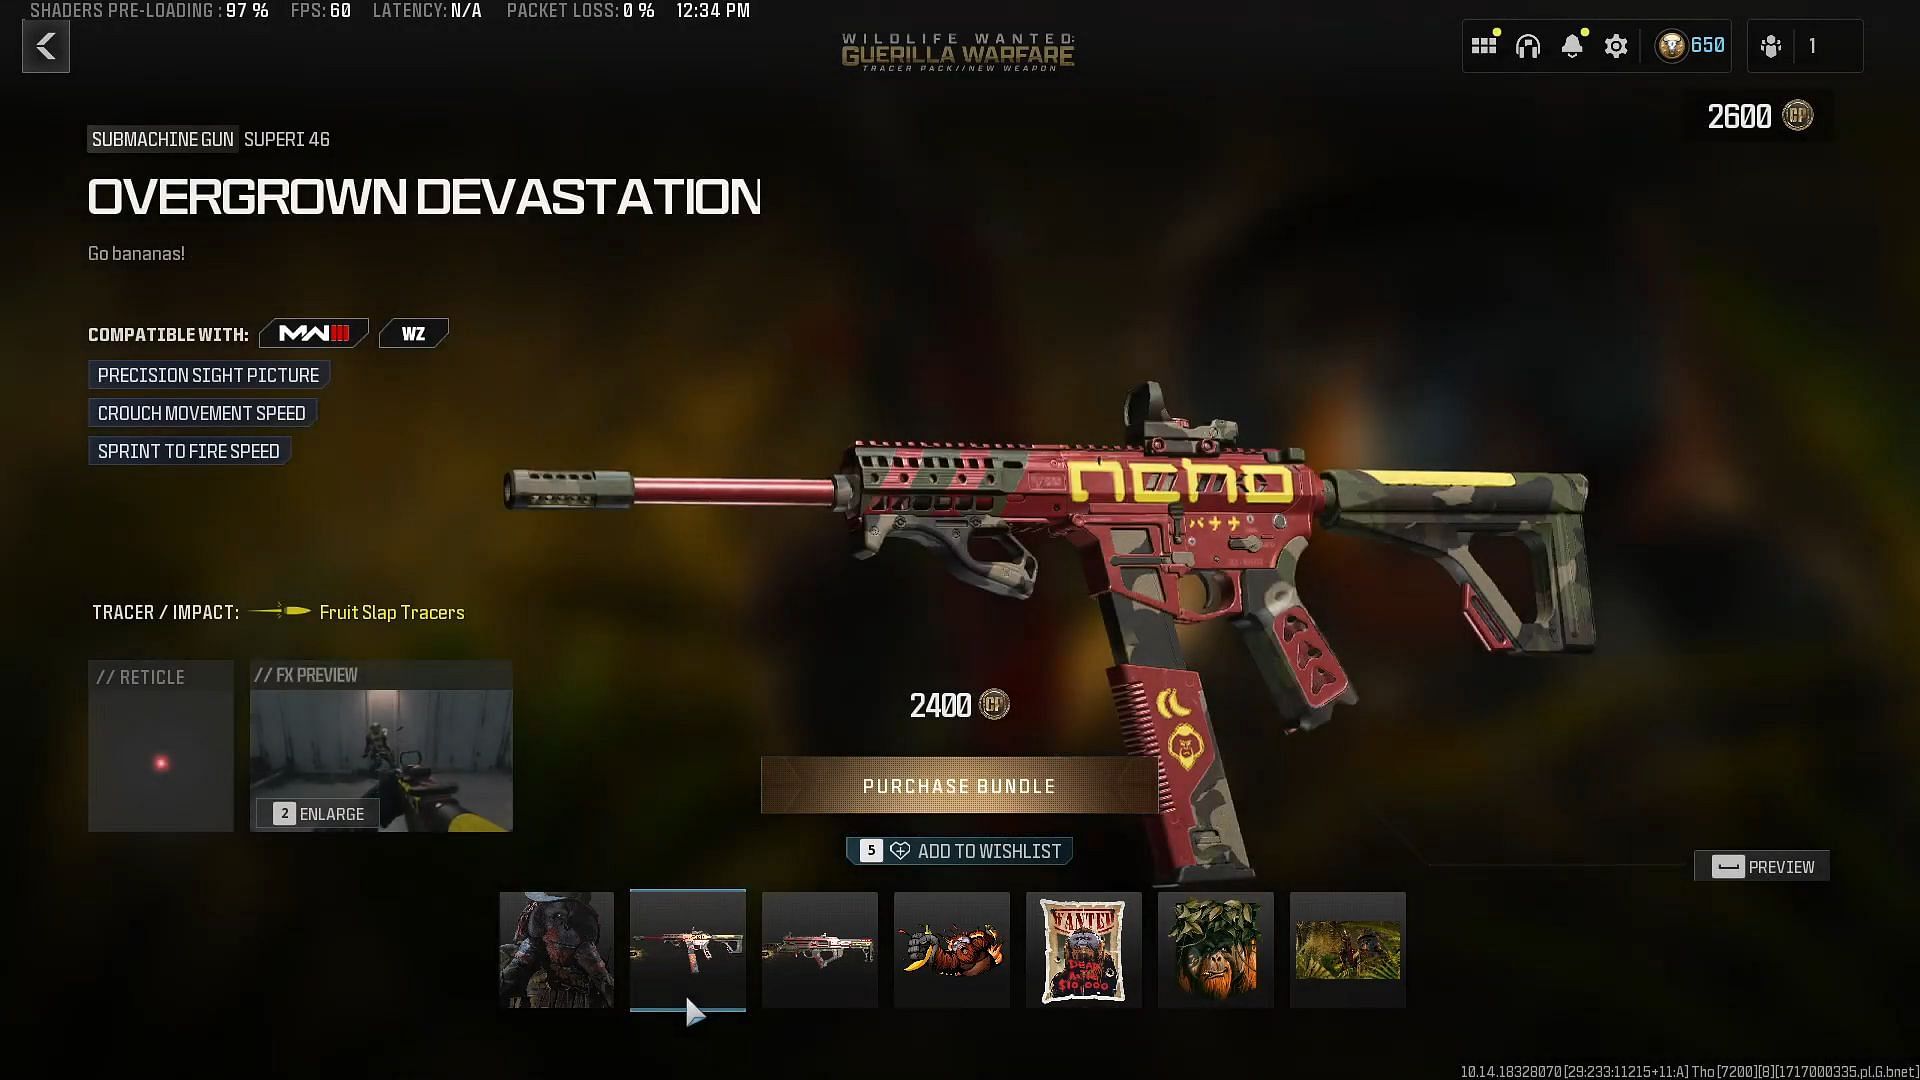 Overgrown Devastation weapon blueprint in MW3 and Warzone (Image via Activision|| via CamoFlauge on YouTube)